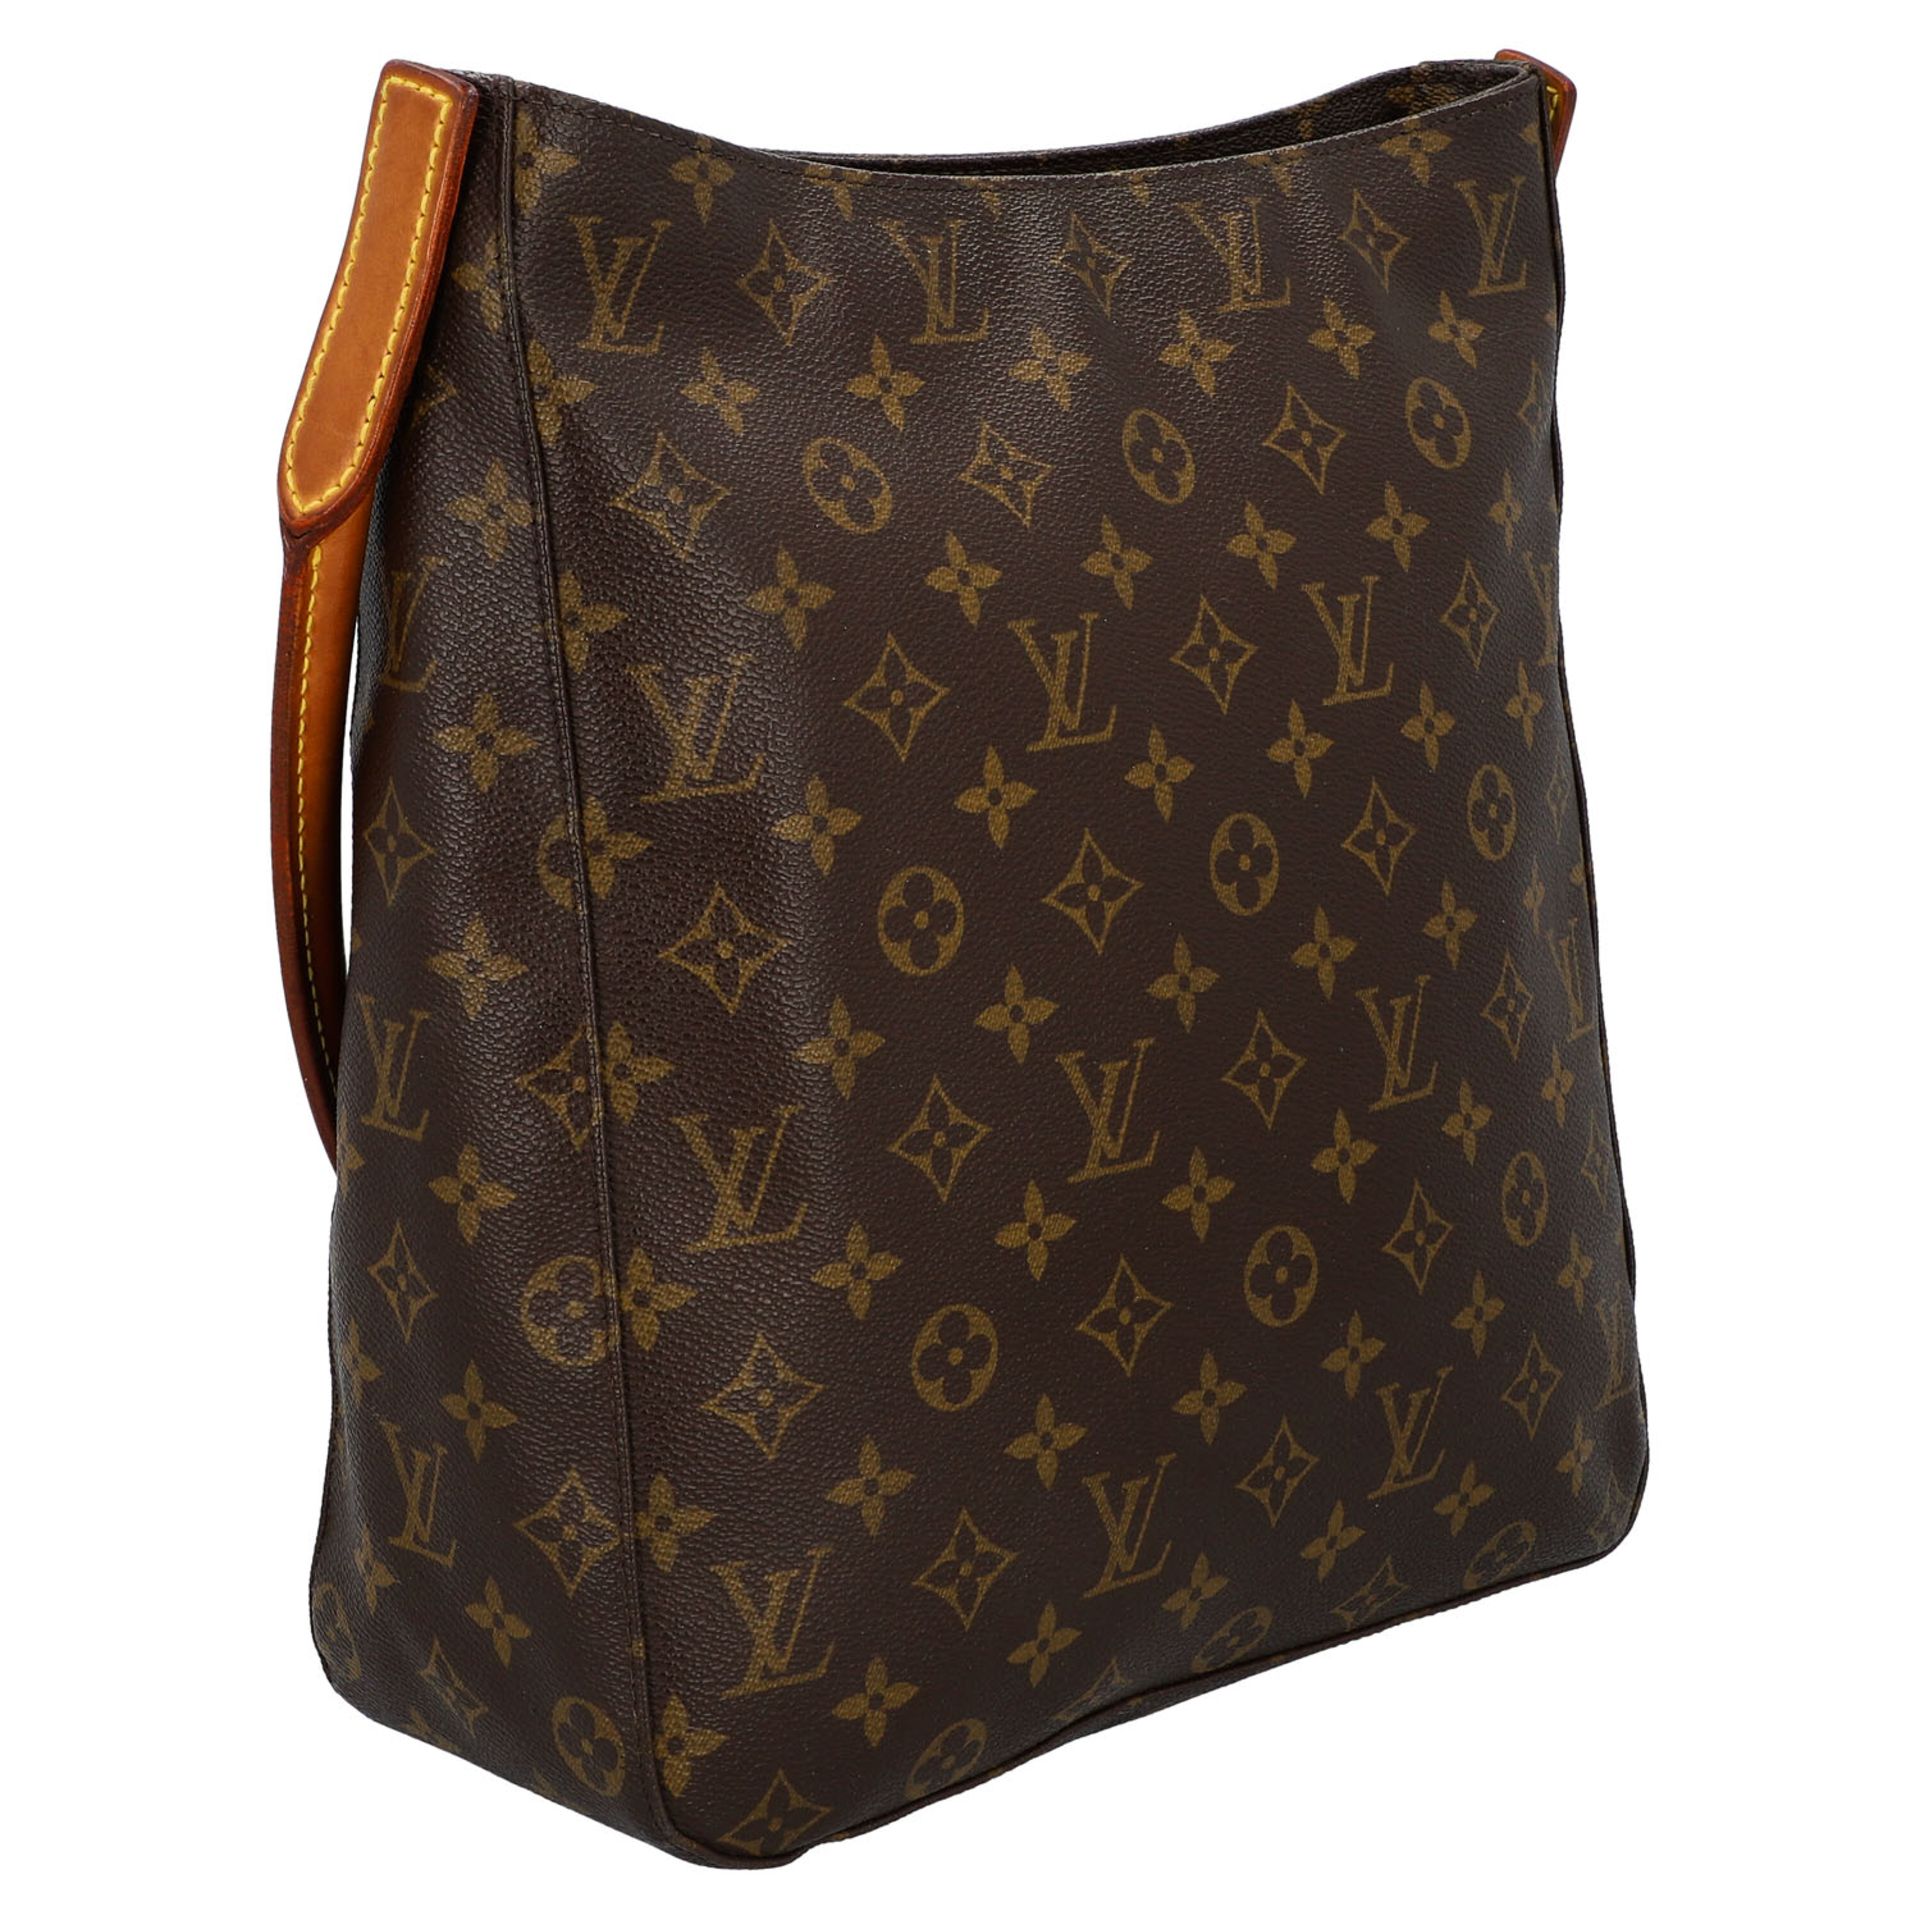 LOUIS VUITTON Schultertasche "LOOPING". - Image 2 of 8